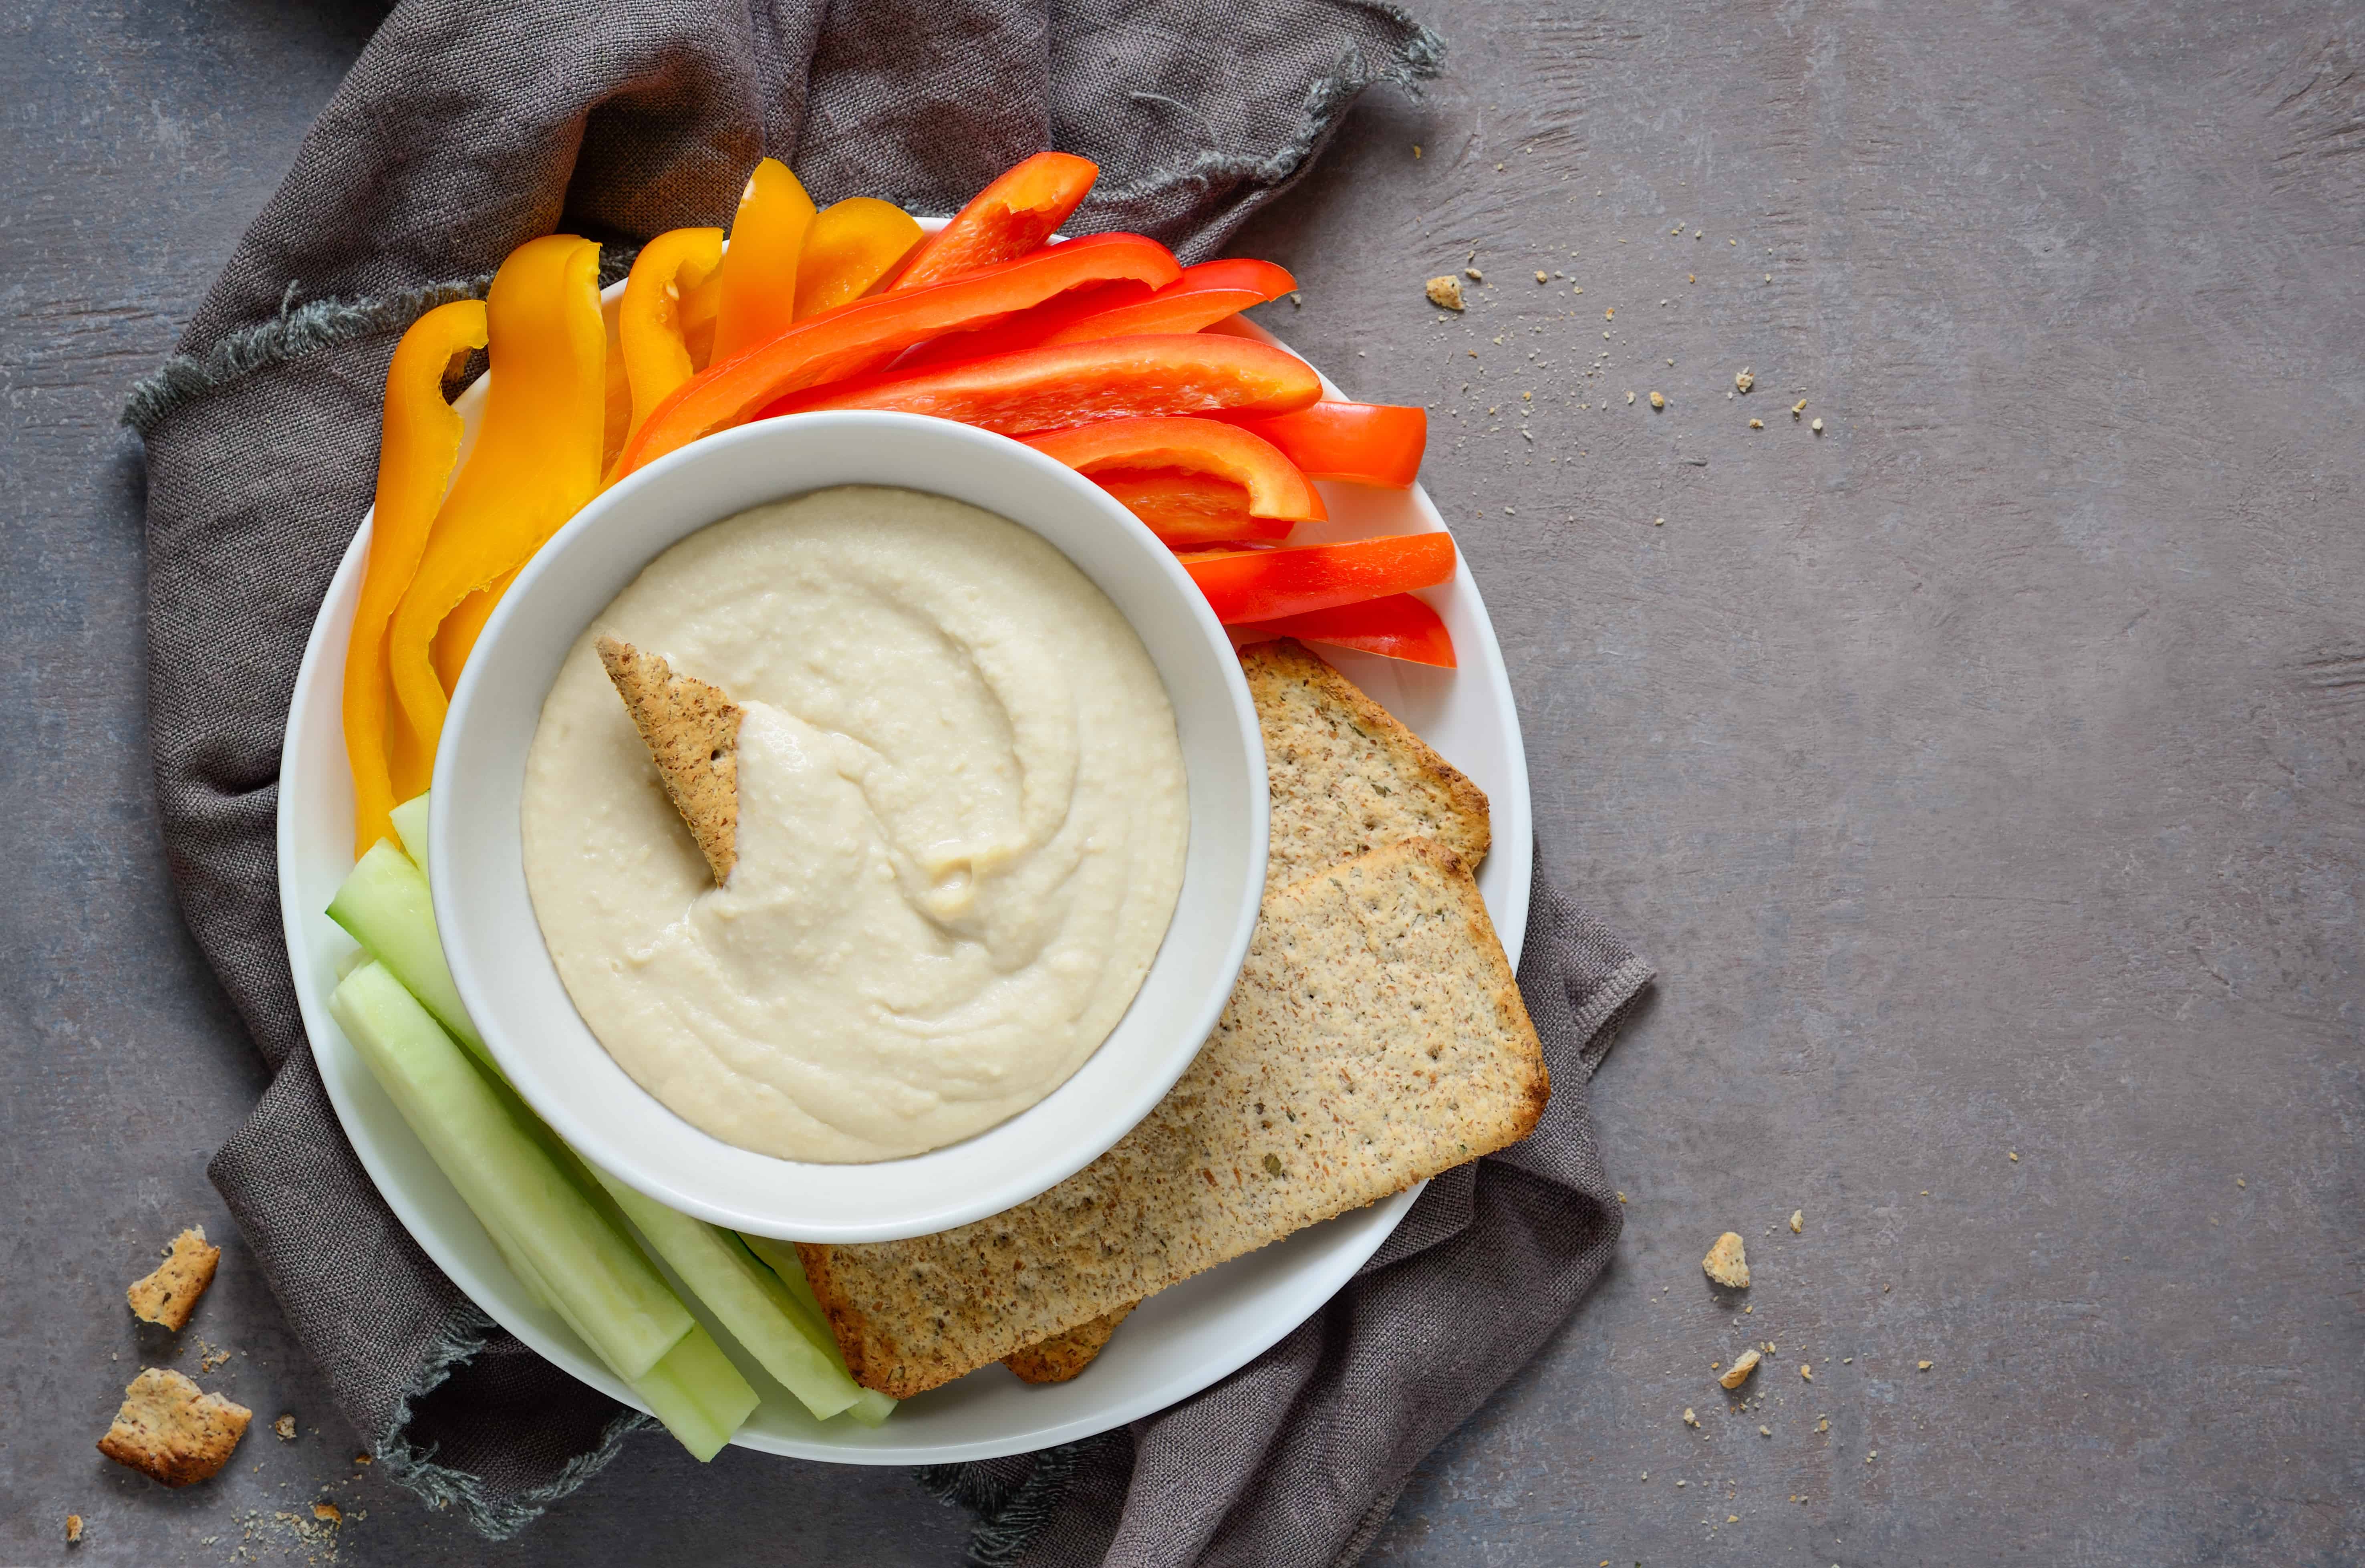 white bean dip - Oil-Free Hummus Recipe Roundup: All the Flavor Without the Added Fat